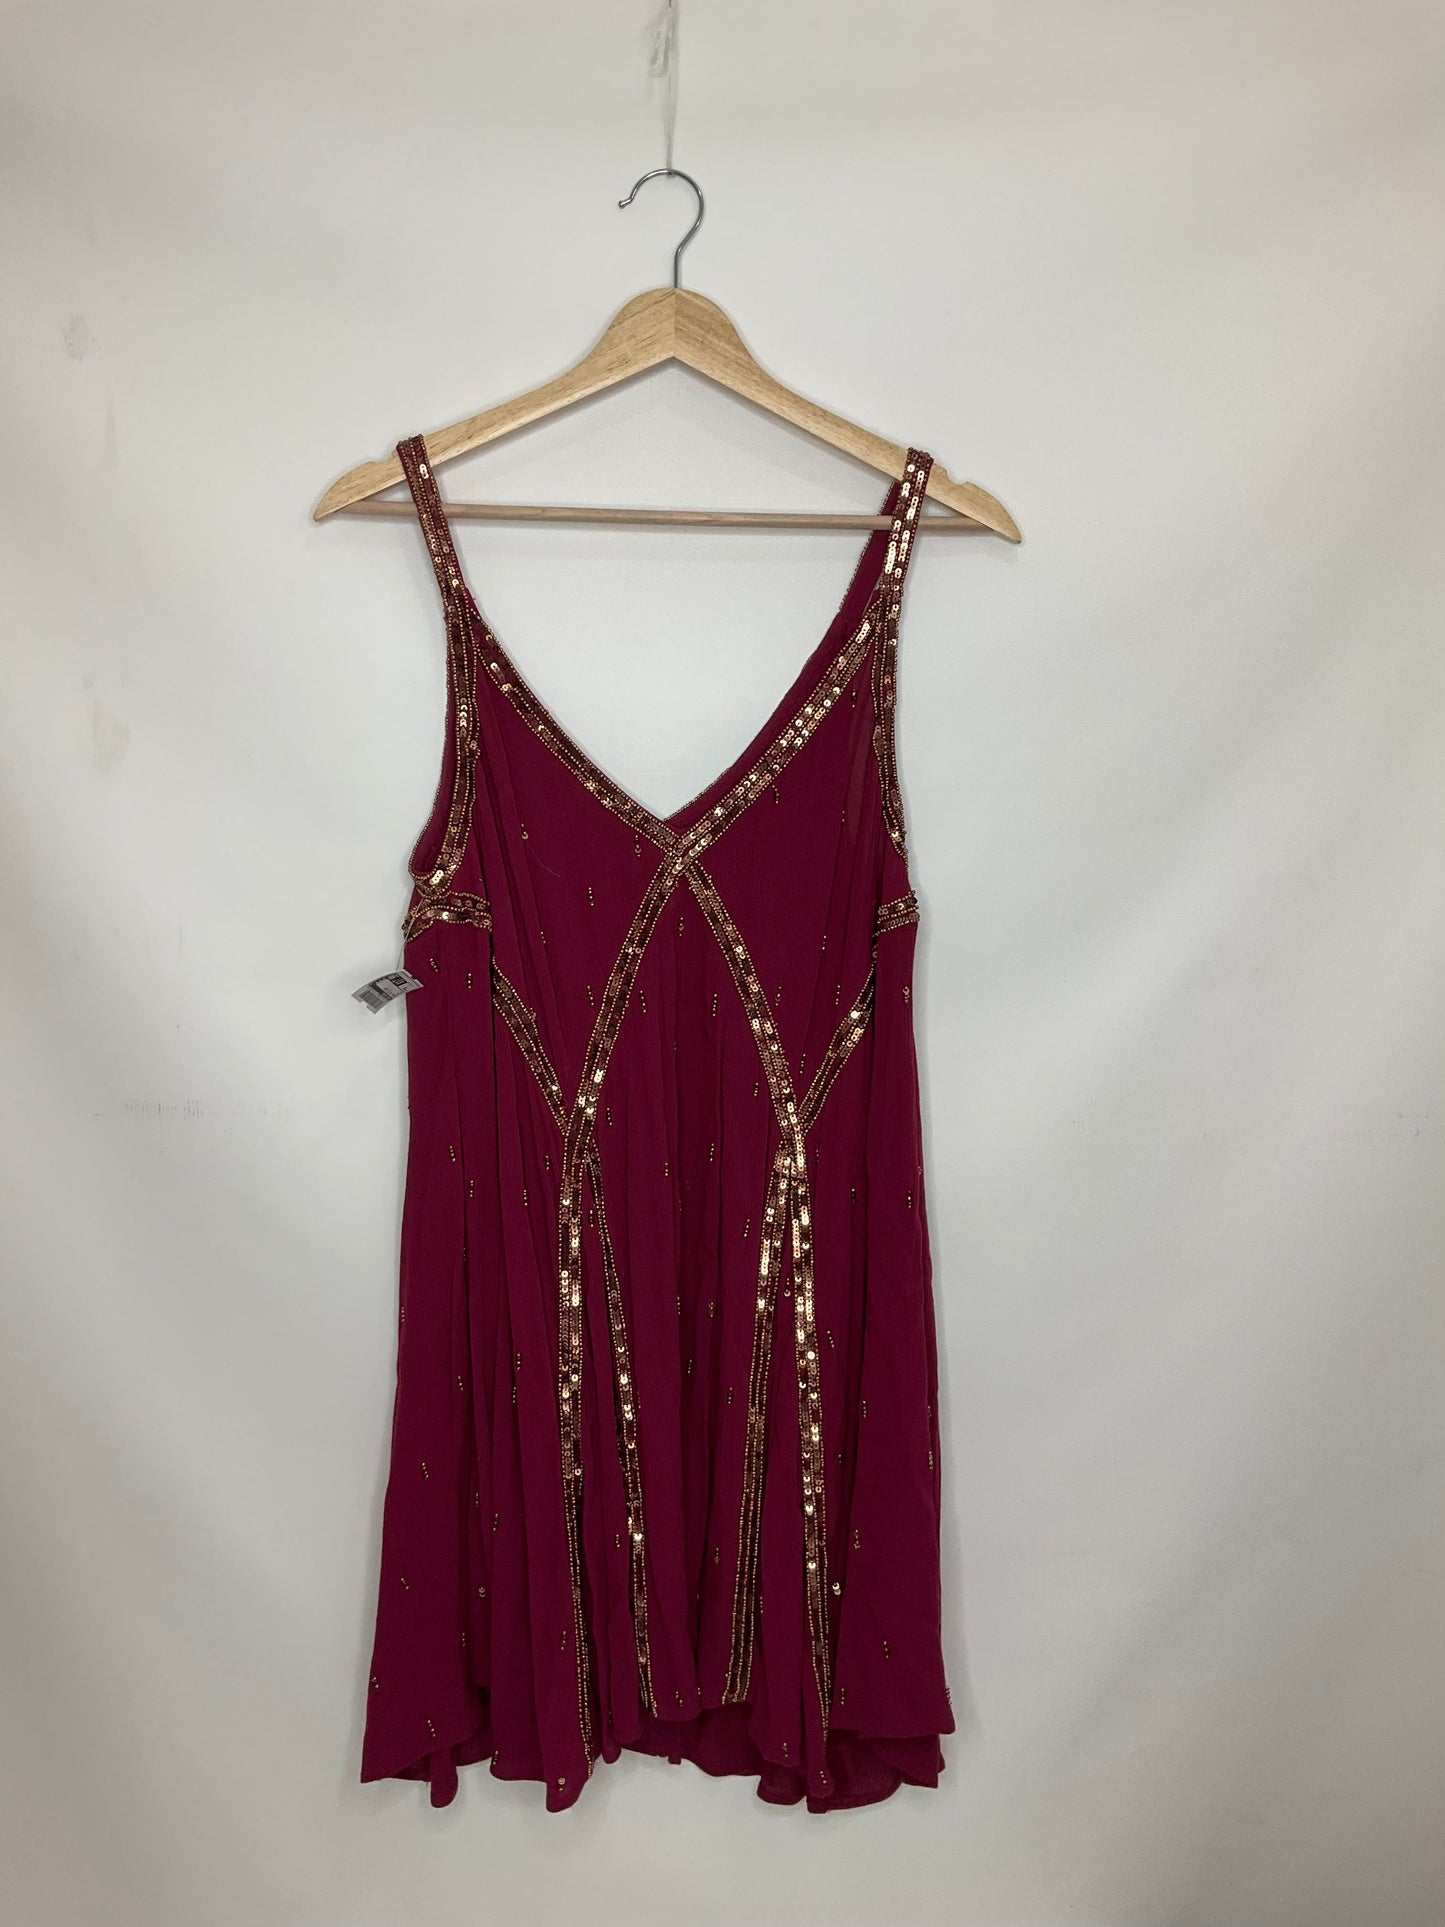 Red Dress Party Short Free People, Size Xs